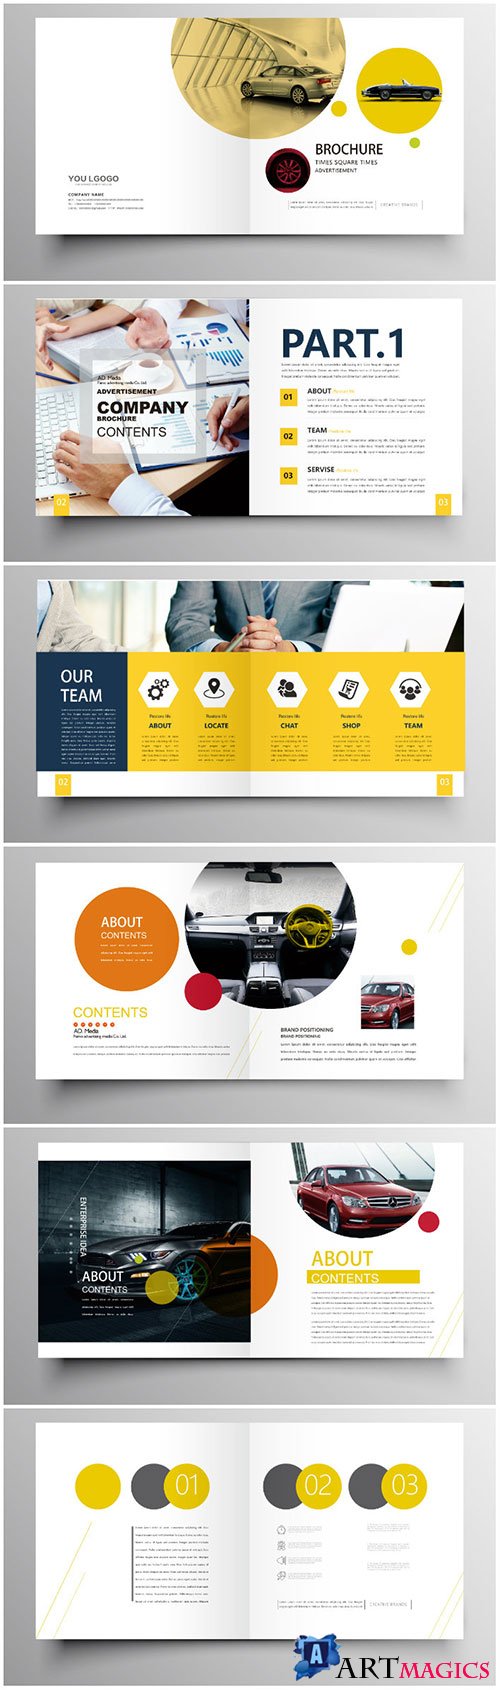 Brochure template vector layout design, corporate business annual report, magazine, flyer mockup # 188